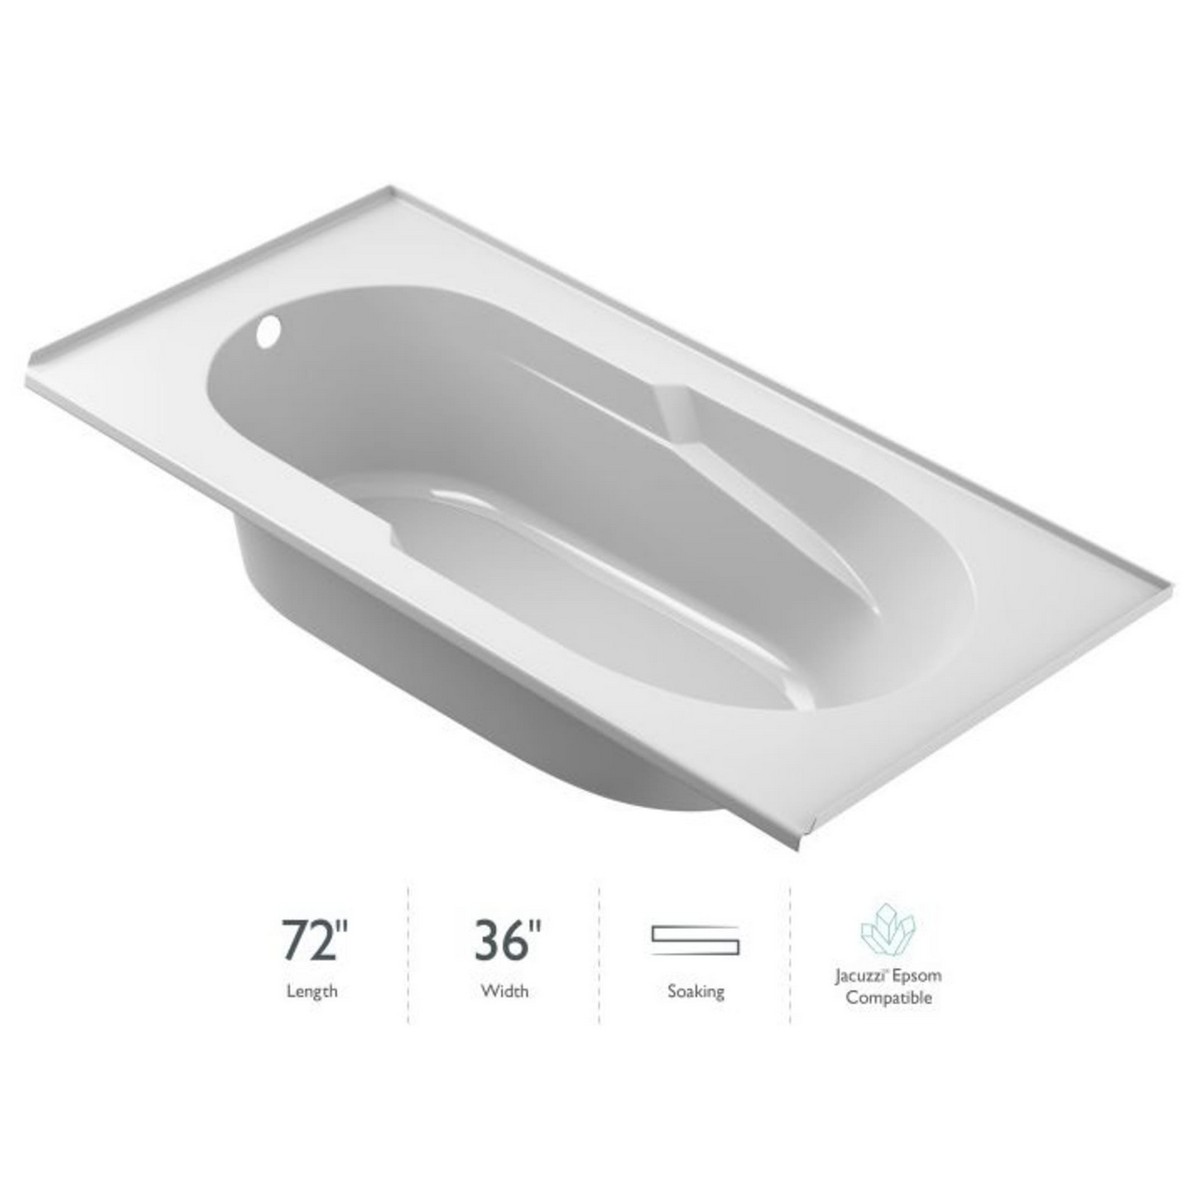 JACUZZI J27236BXXXX SIGNATURE 72 X 36 INCH DROP-IN SOAKING BATHTUB WITH TILING FLANGE